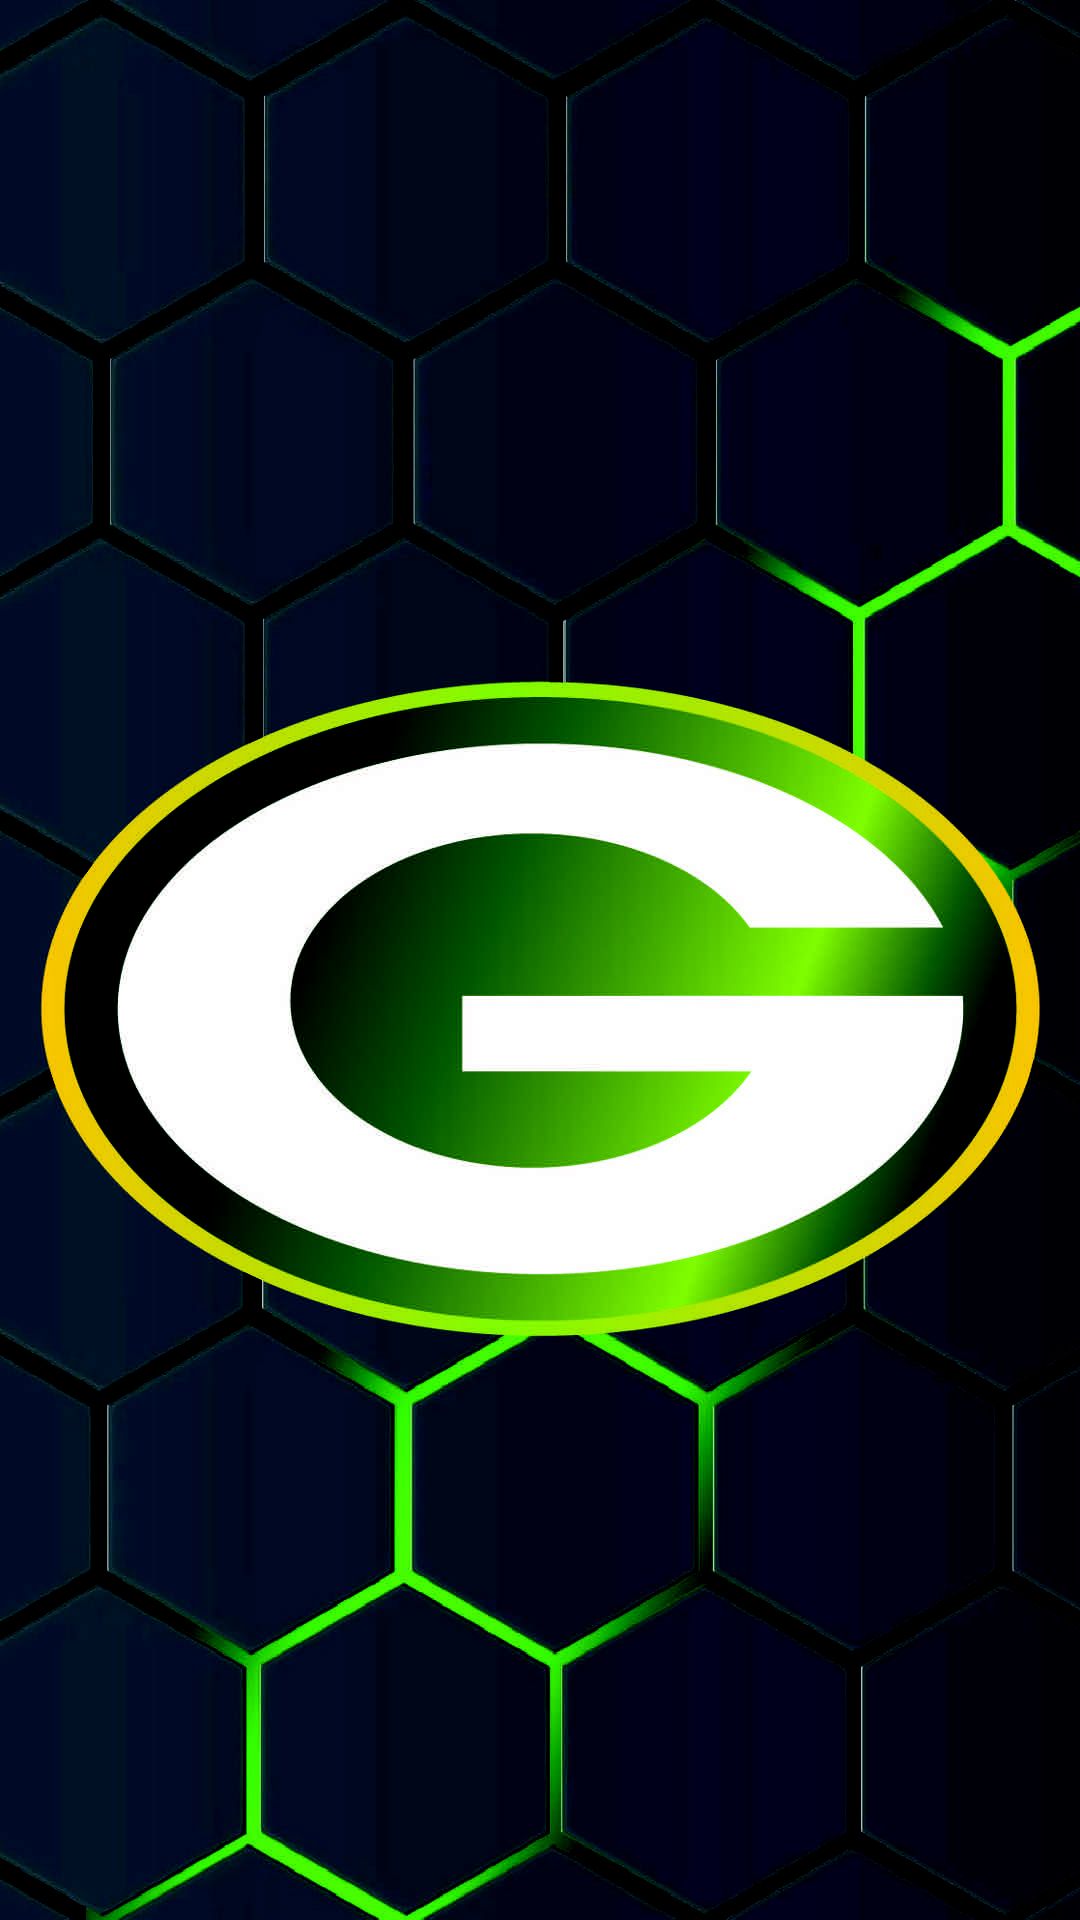 Green Bay Packers. Green bay packers logo, Green bay packers crafts